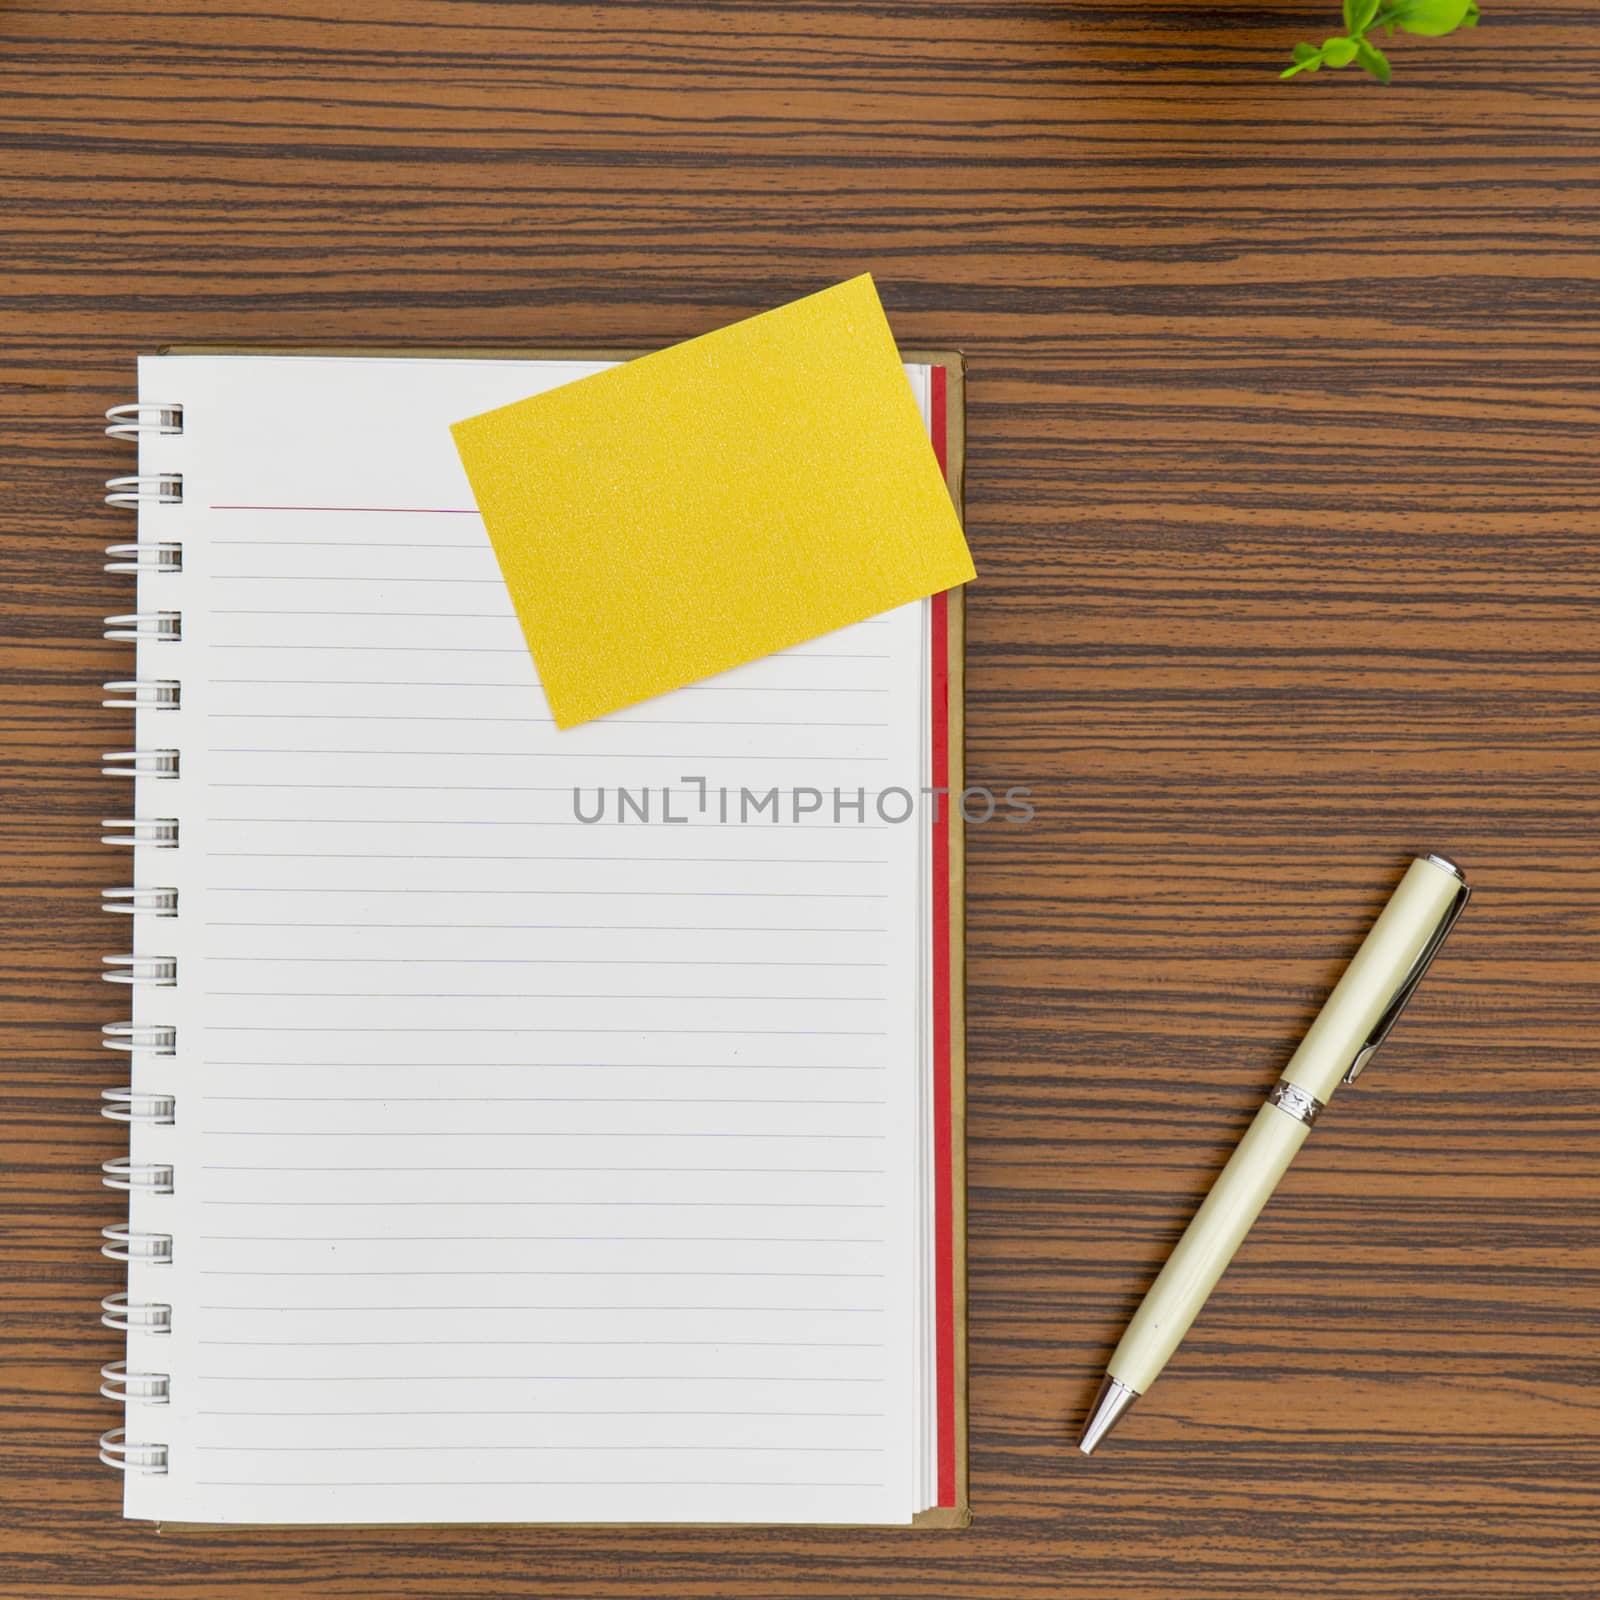 Personal notepad, yellow paper note and a pen on a zebra wood brown striped table.